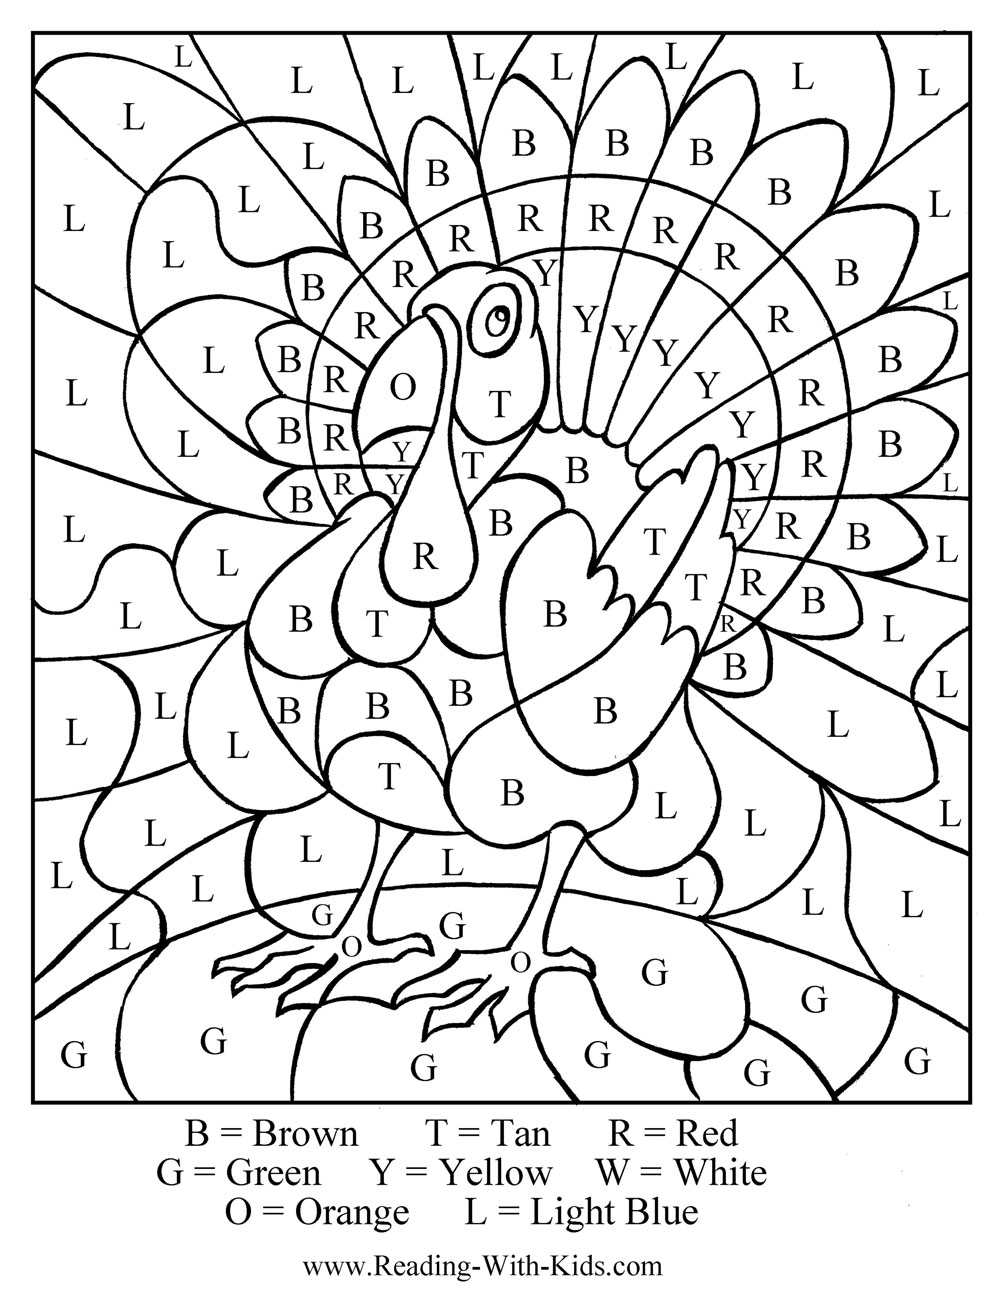 Thanksgiving Color by Number Coloring Sheets Image